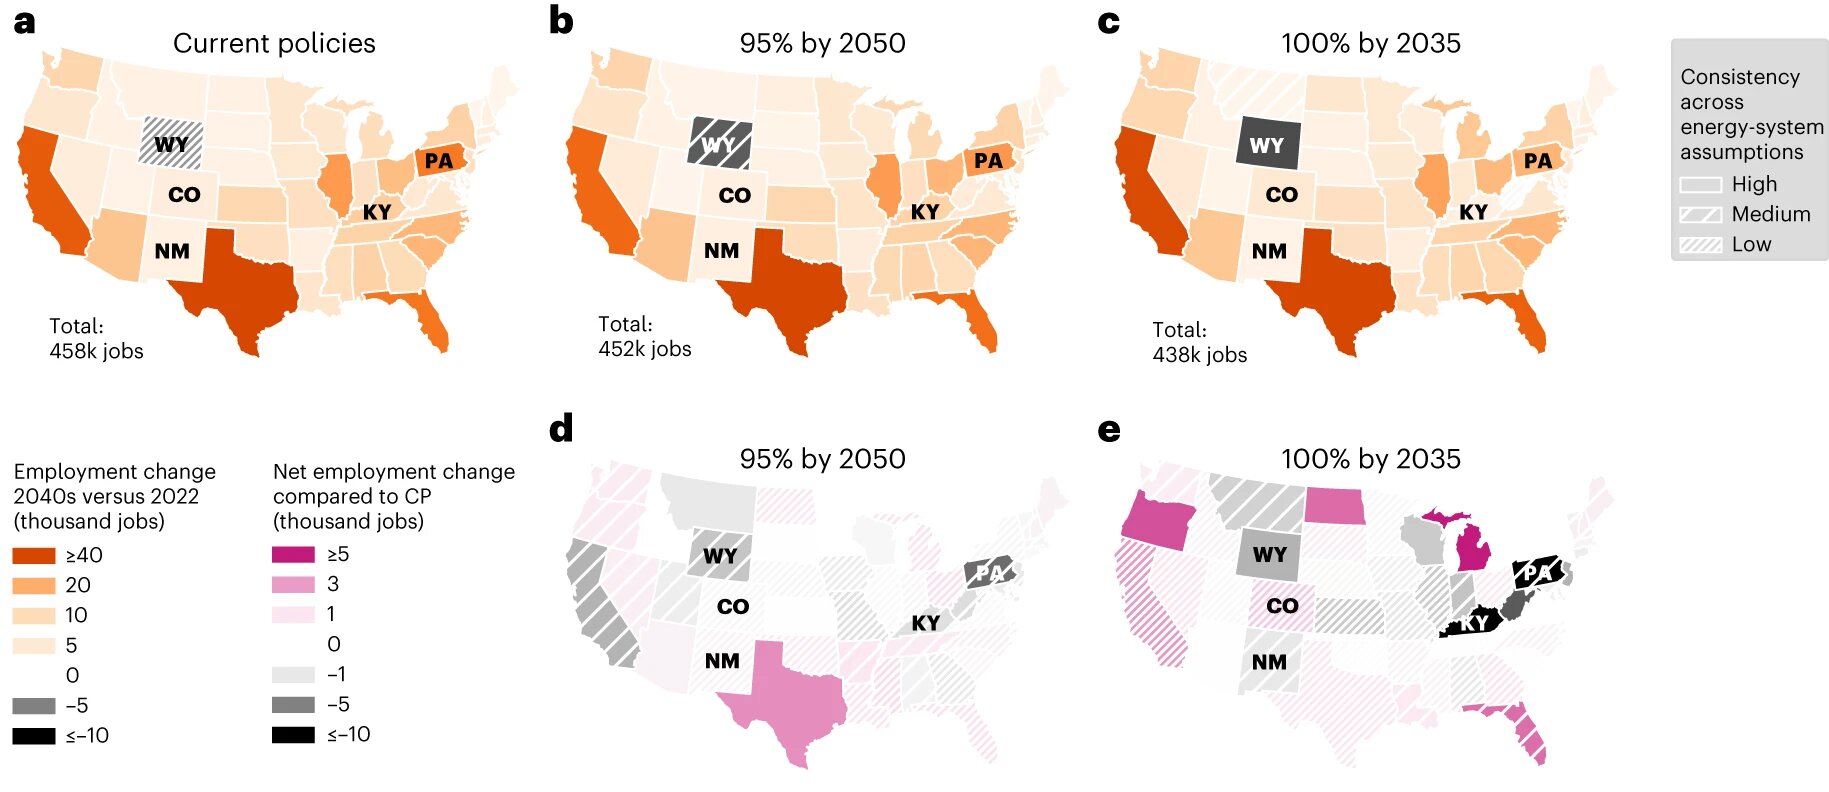 america-s-low-carbon-transition-could-improve-employment-opportunities-for-all